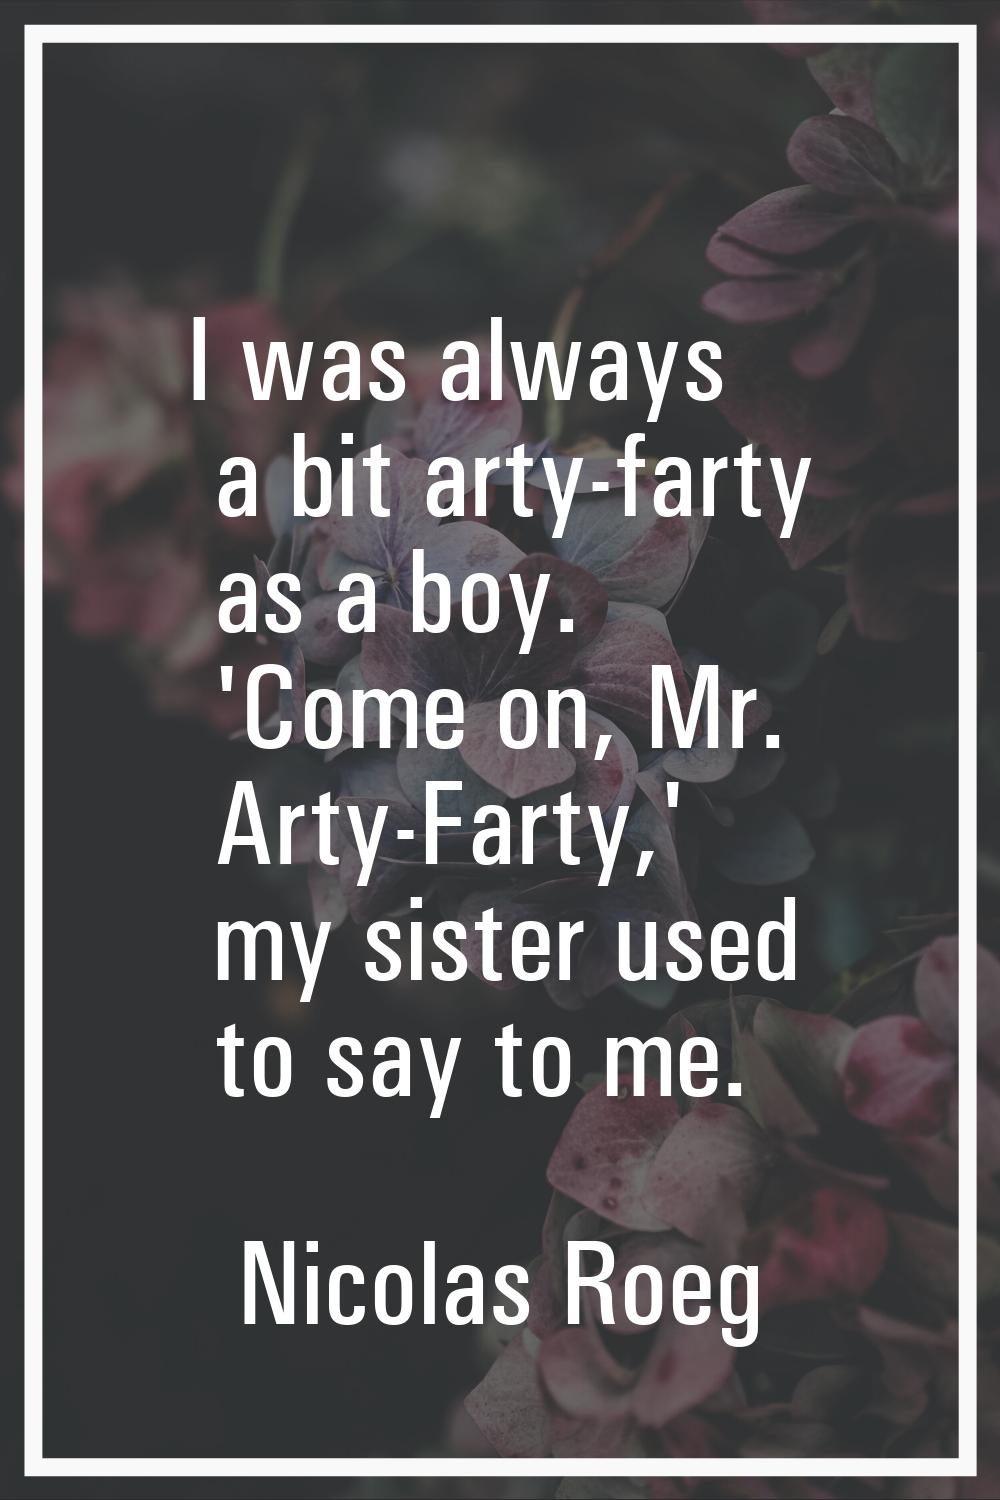 I was always a bit arty-farty as a boy. 'Come on, Mr. Arty-Farty,' my sister used to say to me.